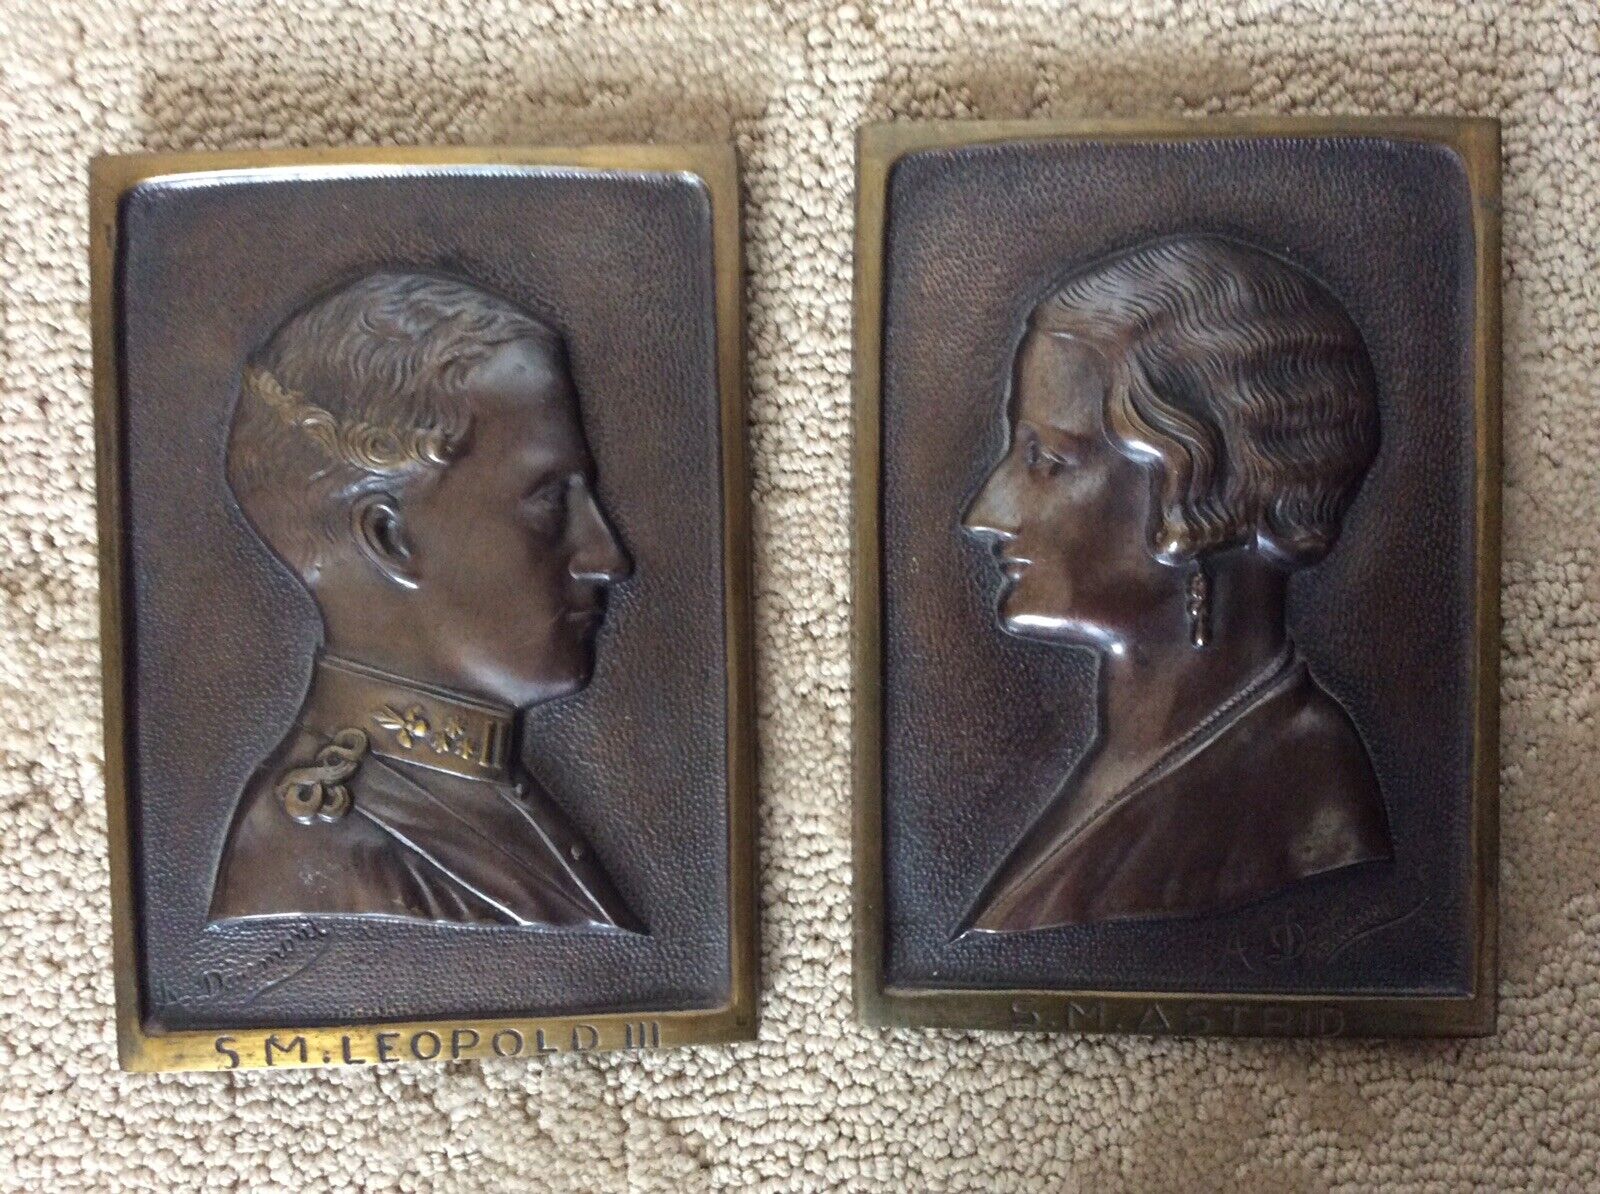 A PAIR OF BRONZE PLAQUES KING AND QUEEN OF BELGIUM SIGNED BY ARTIST A DAUMONT